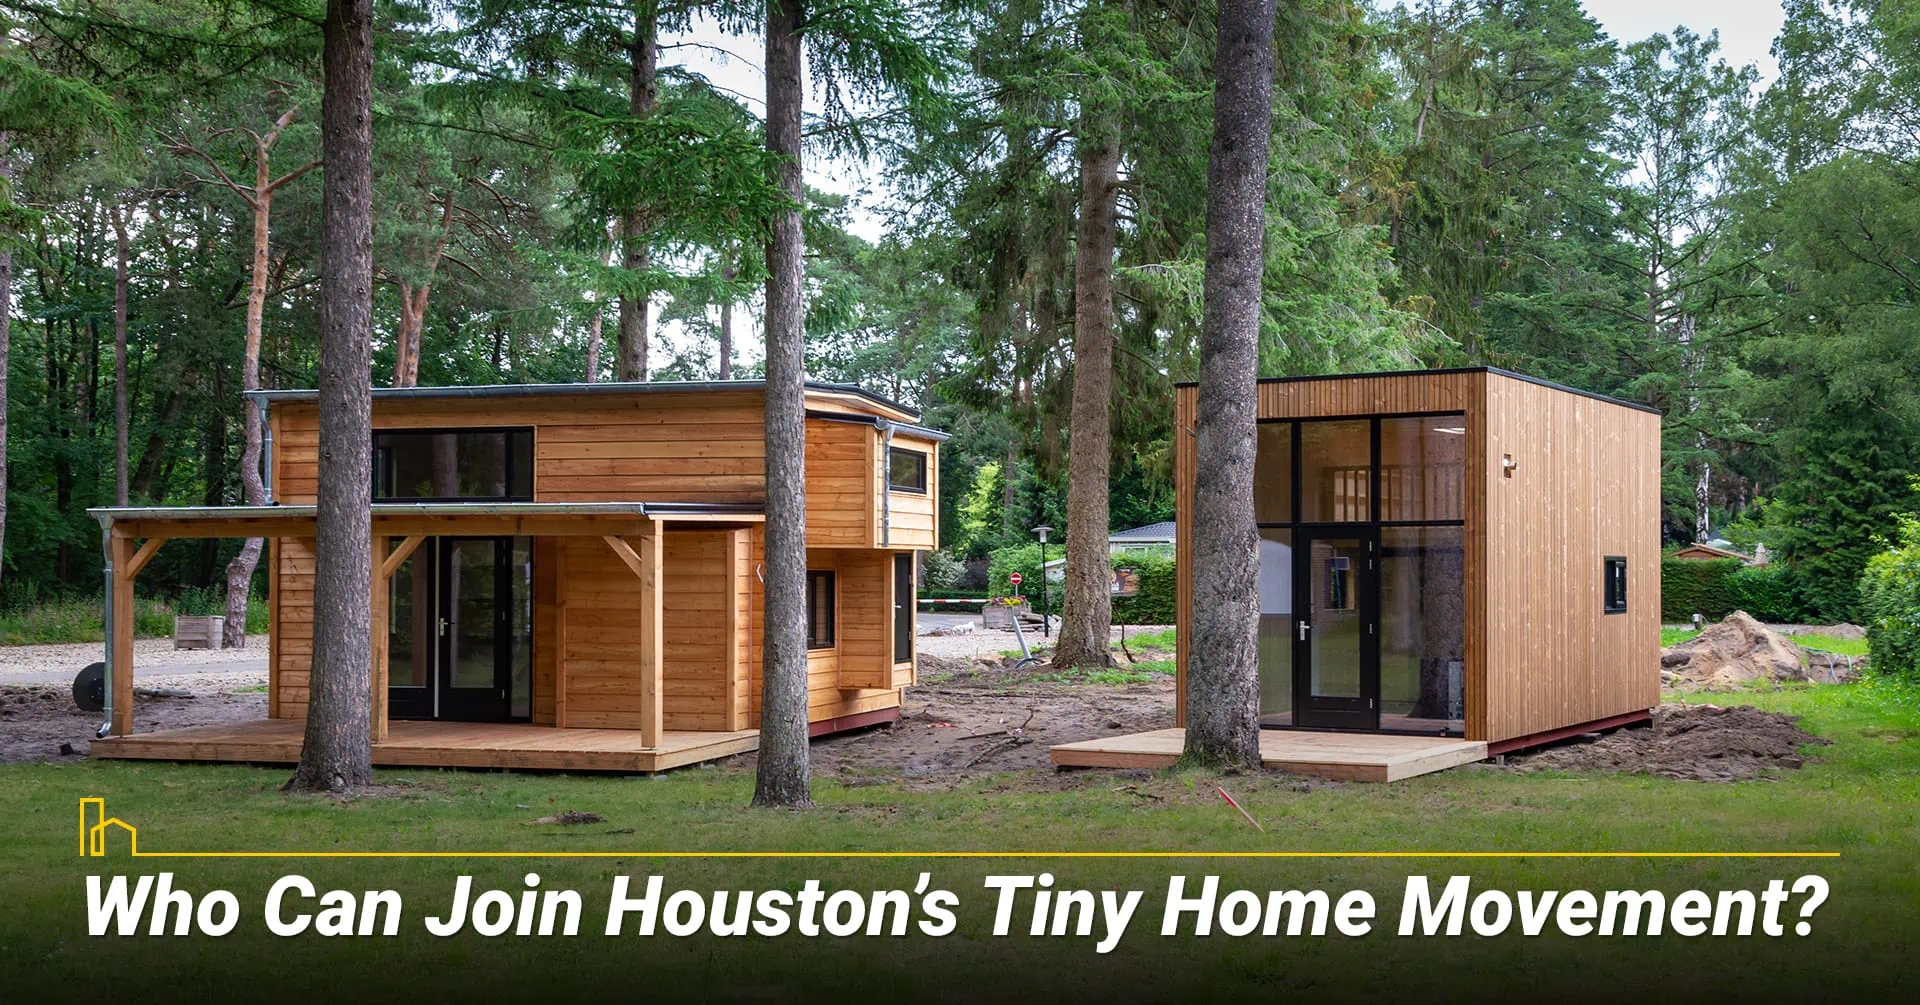 WHO CAN JOIN HOUSTON’S TINY HOME MOVEMENT?